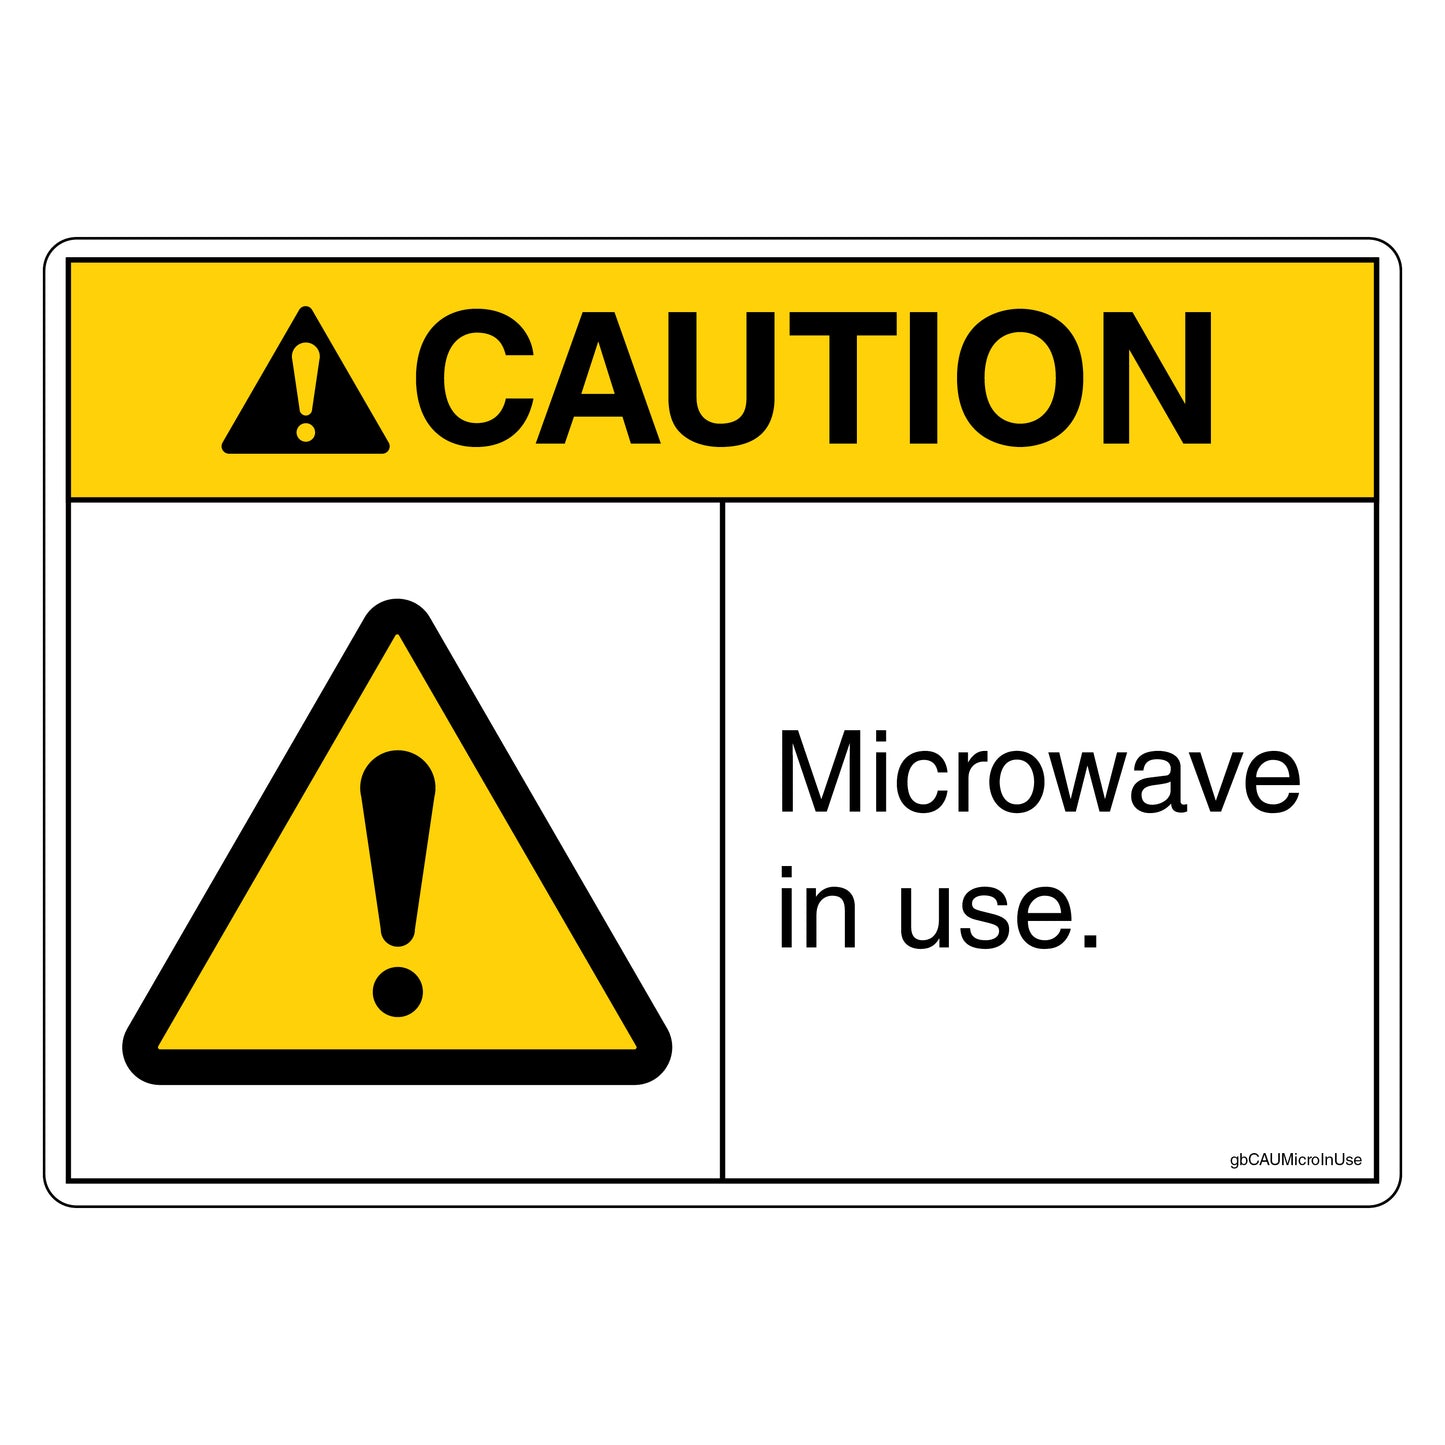 Caution Microwave In Use Decal.